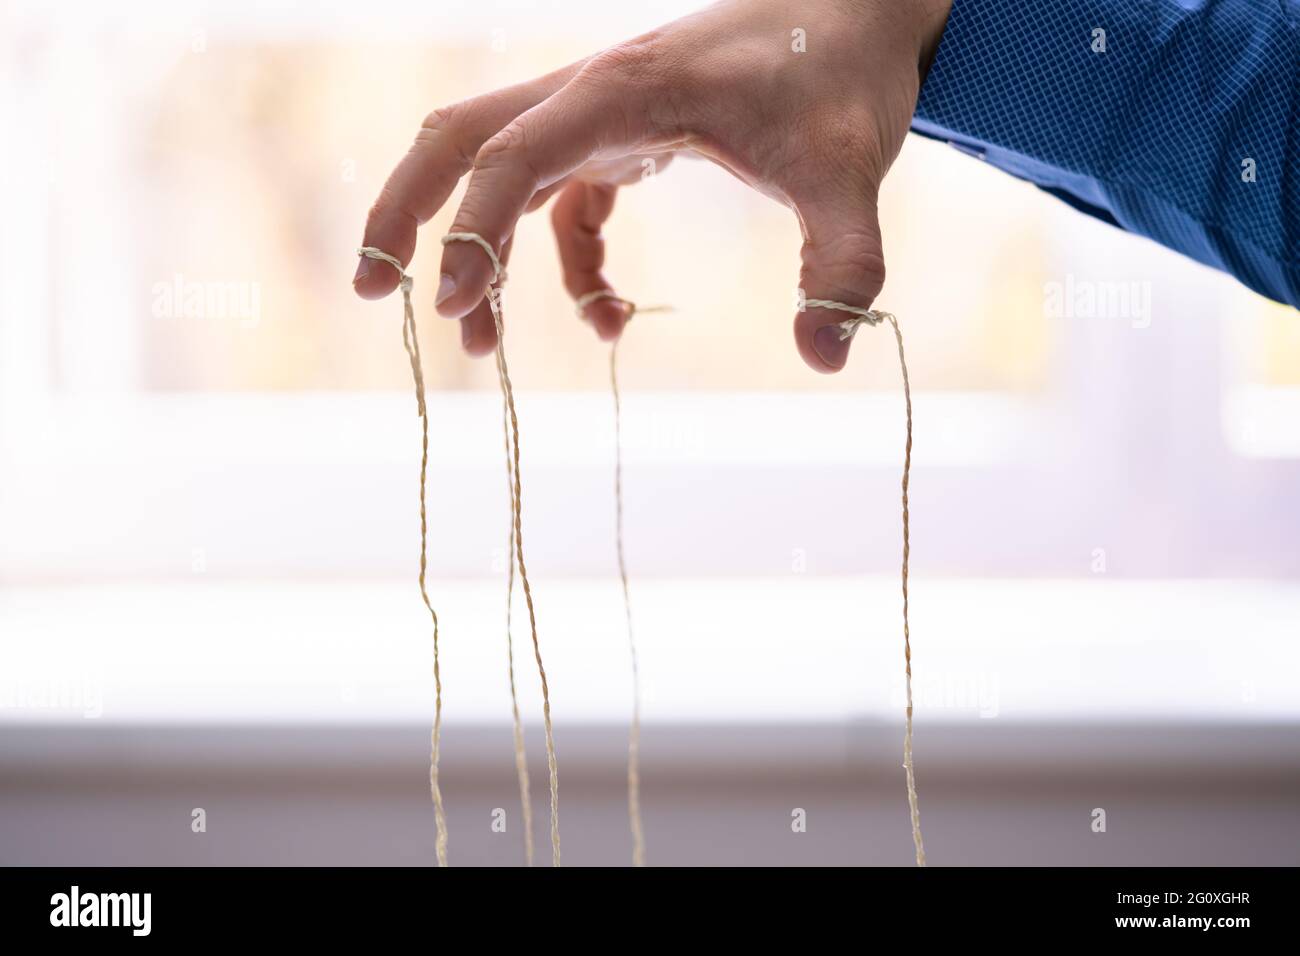 Manipulating Marionette Puppet Strings By Hand. Business Power Stock Photo